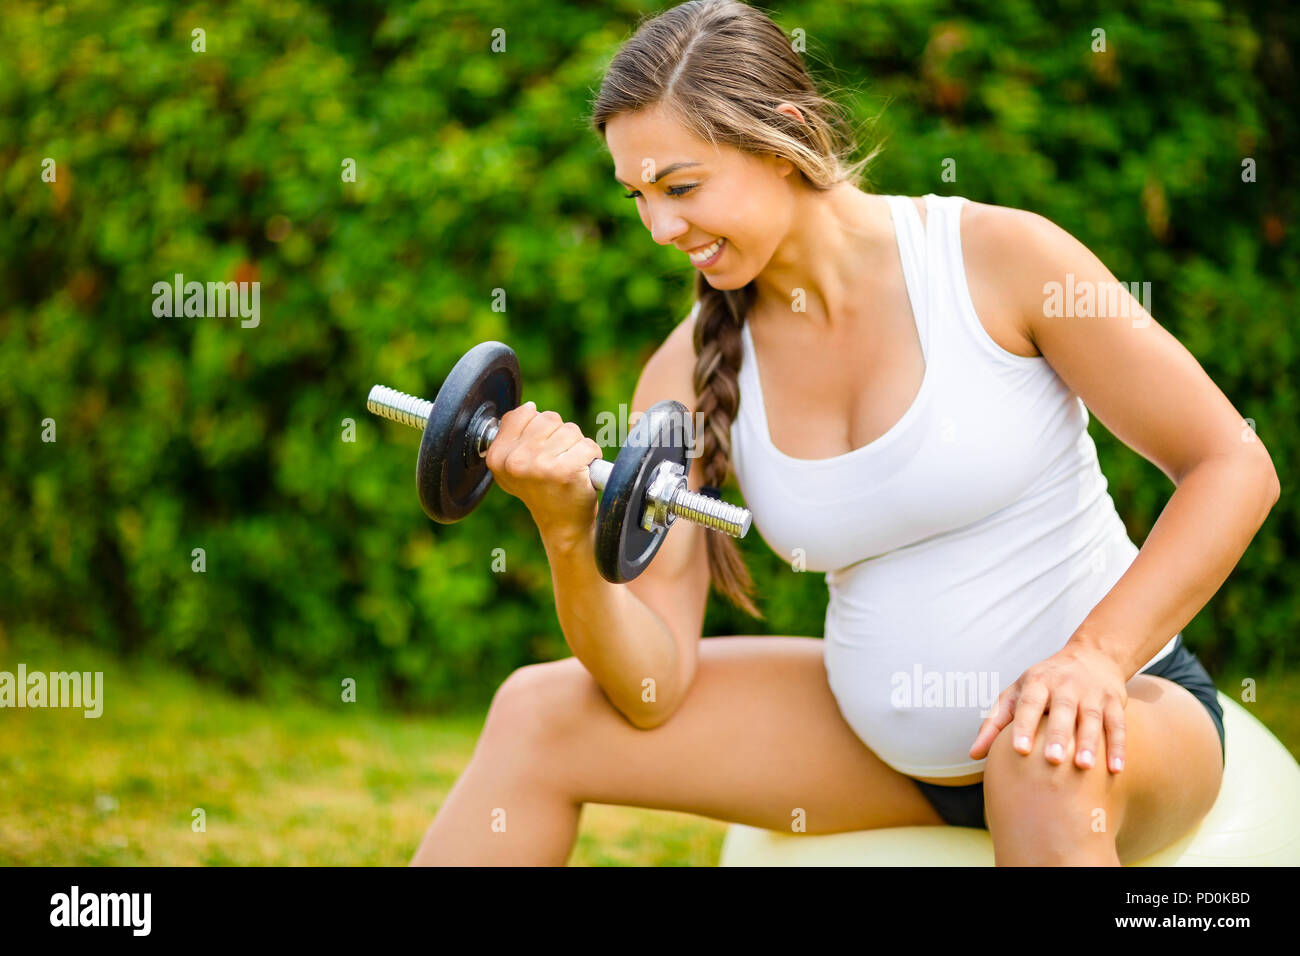 Pregnant Woman Lifting Dumbbells While Sitting On Exercise Ball Stock Photo